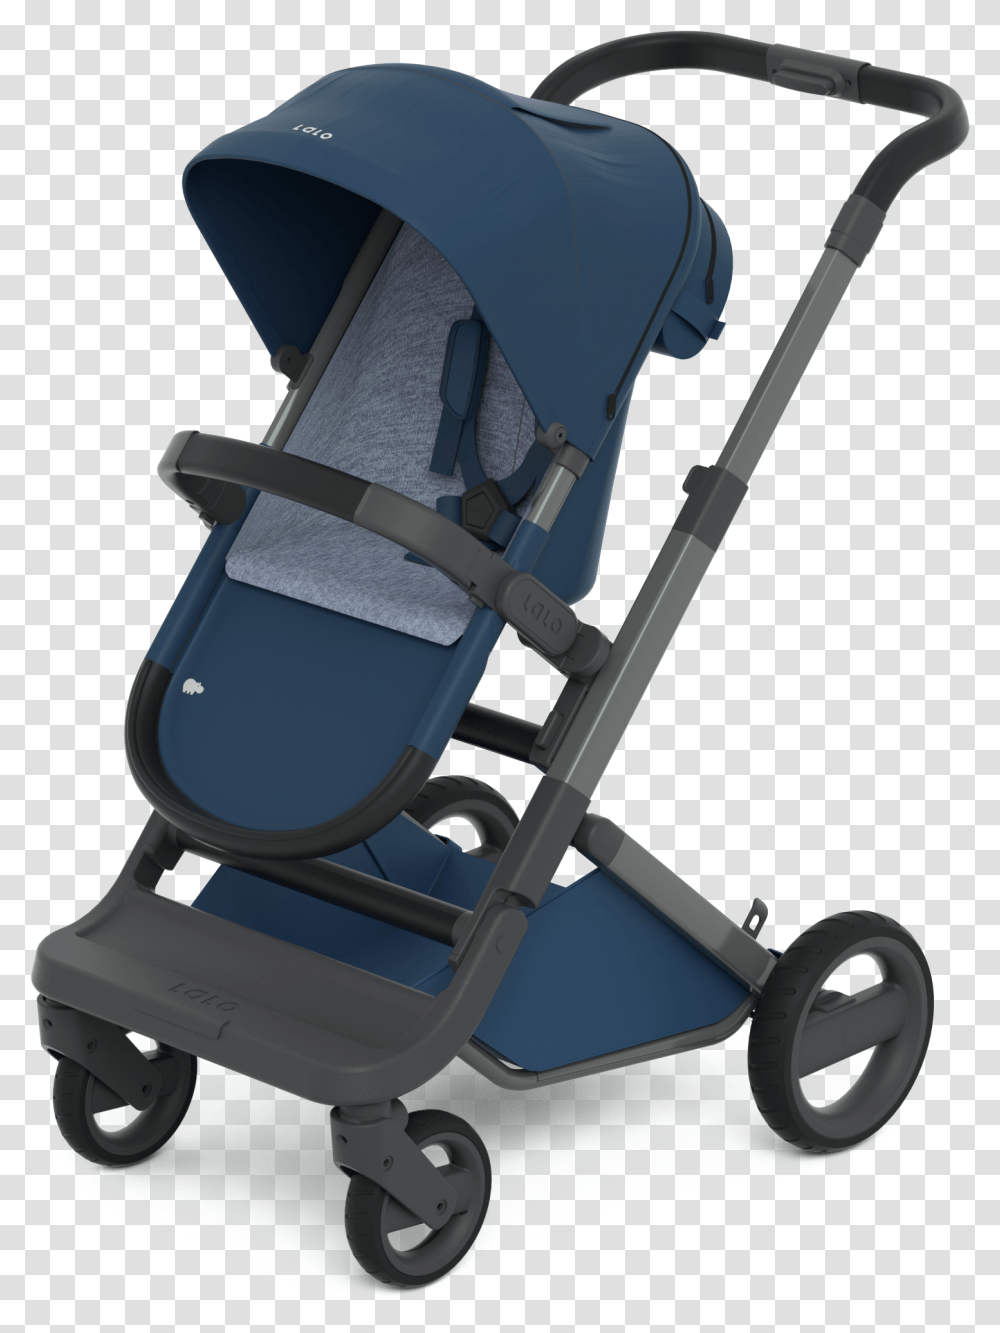 The Best Baby Strollers Of 2020 Stroller, Lawn Mower, Tool, Vehicle, Transportation Transparent Png